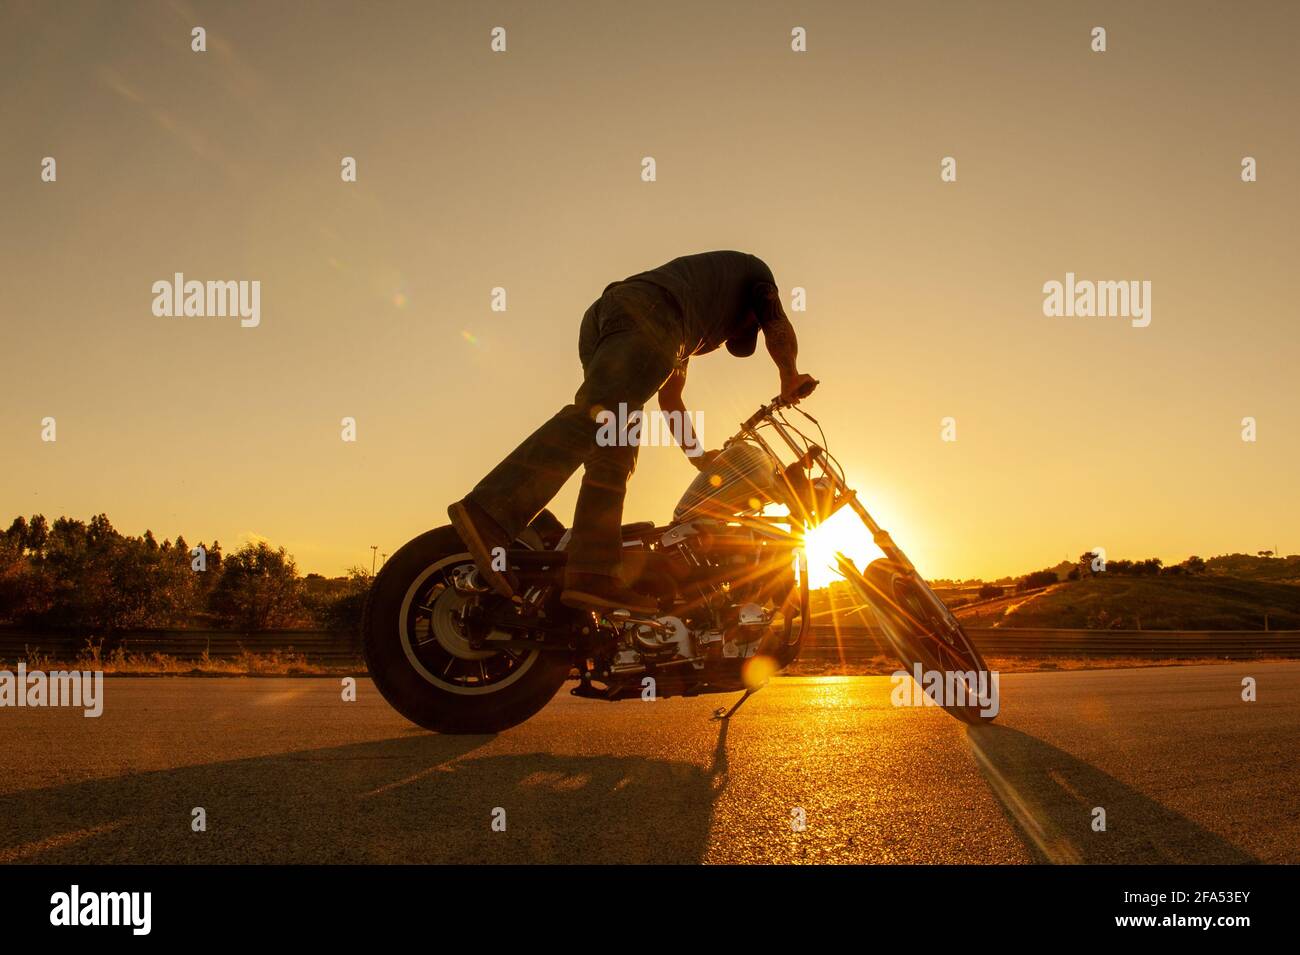 motorcyclist turns on the motorcycle Stock Photo